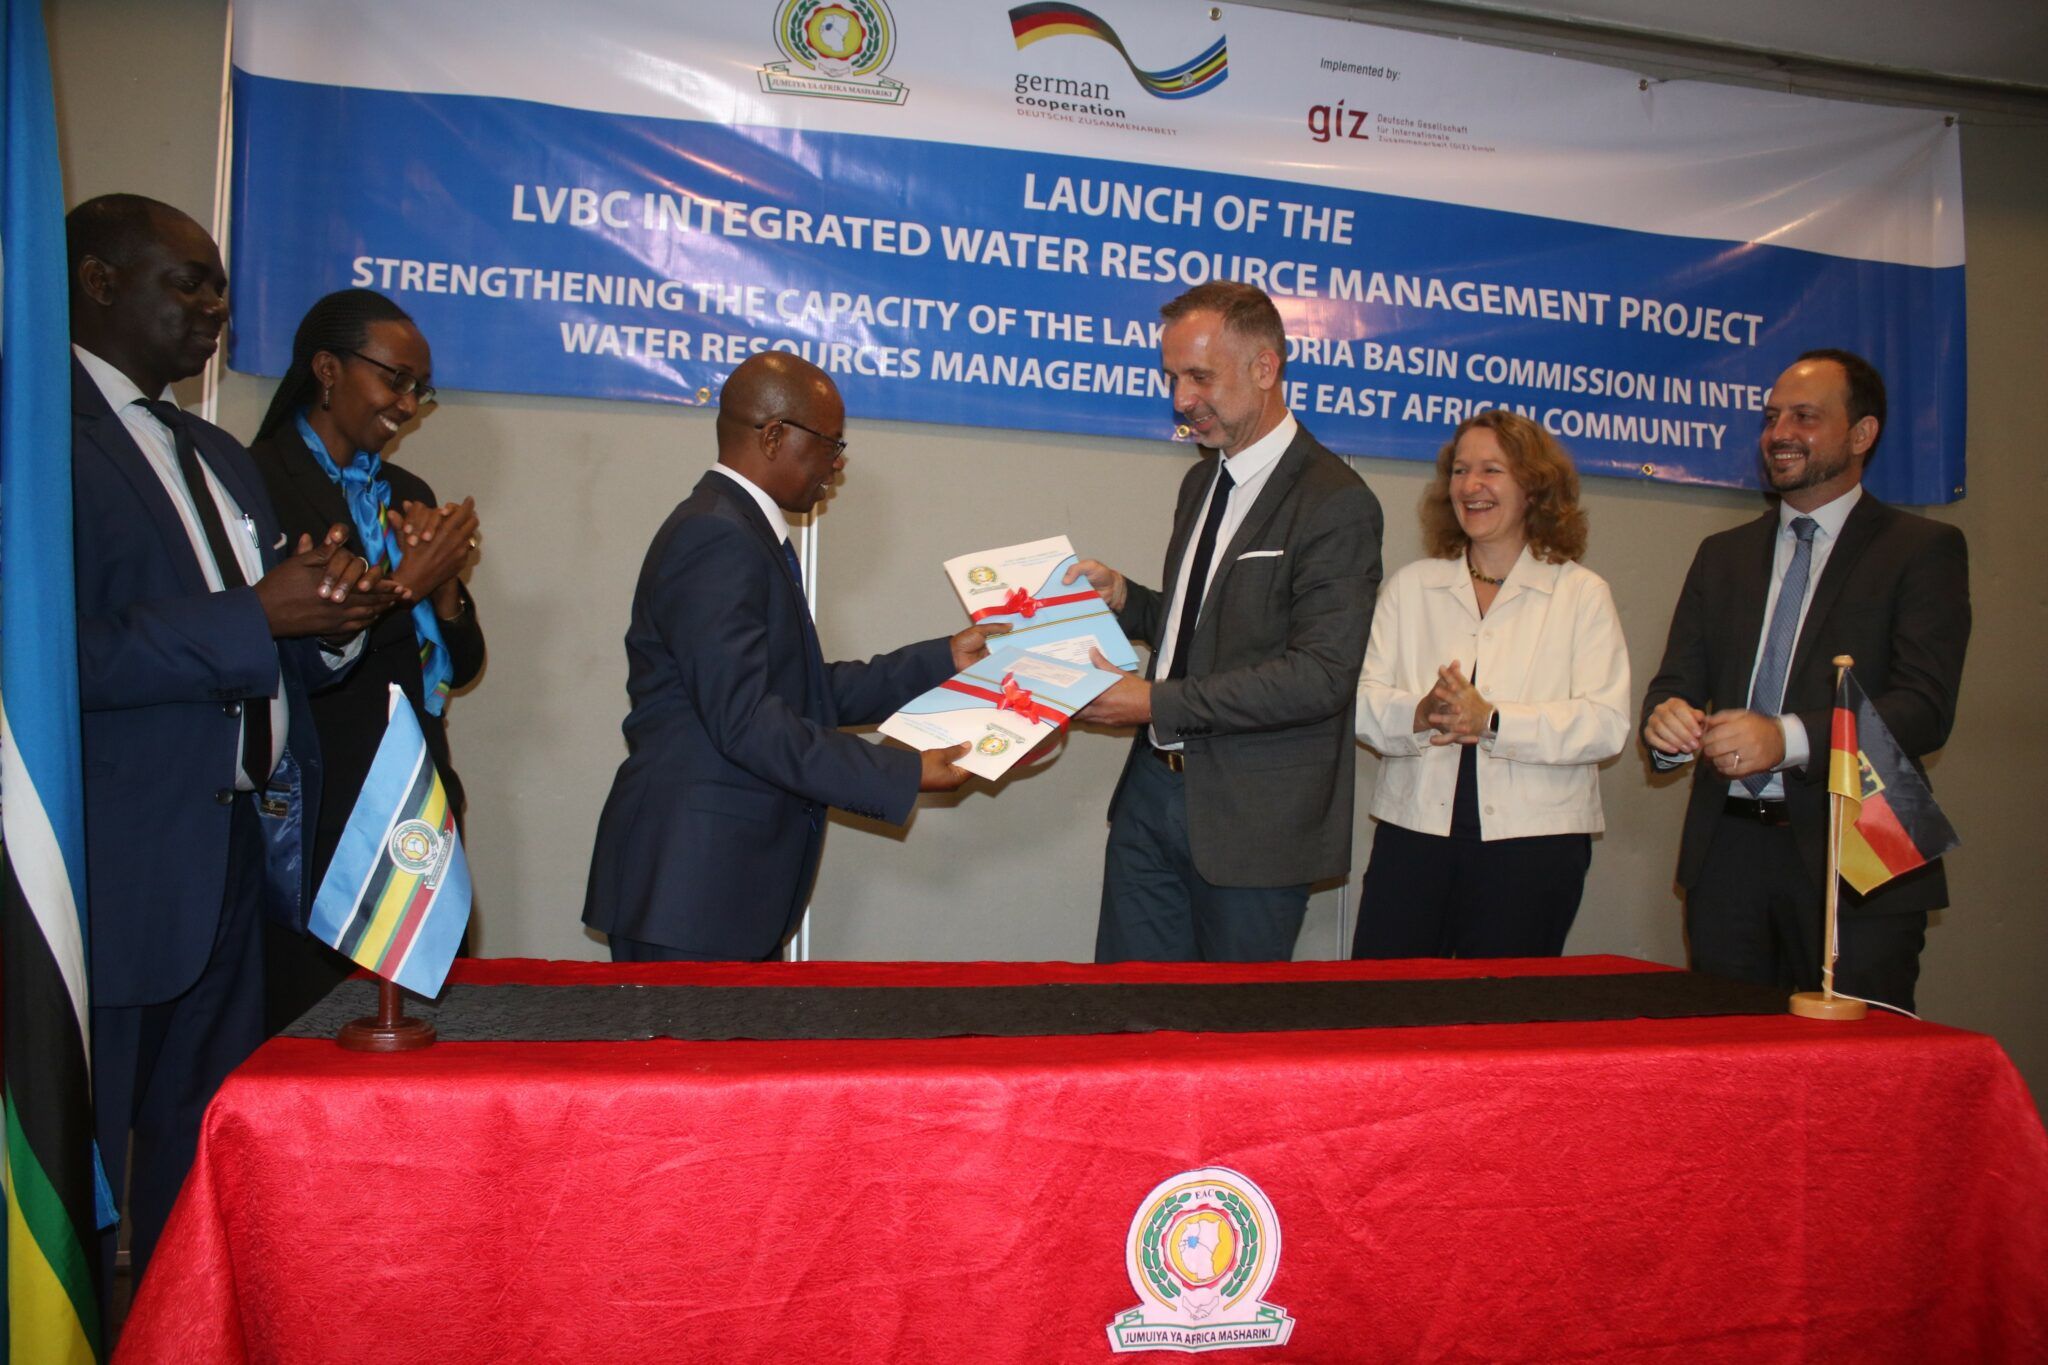 Project for Strengthening Integrated Water Resource Management launched at LVBC in Kisumu (GIZ)